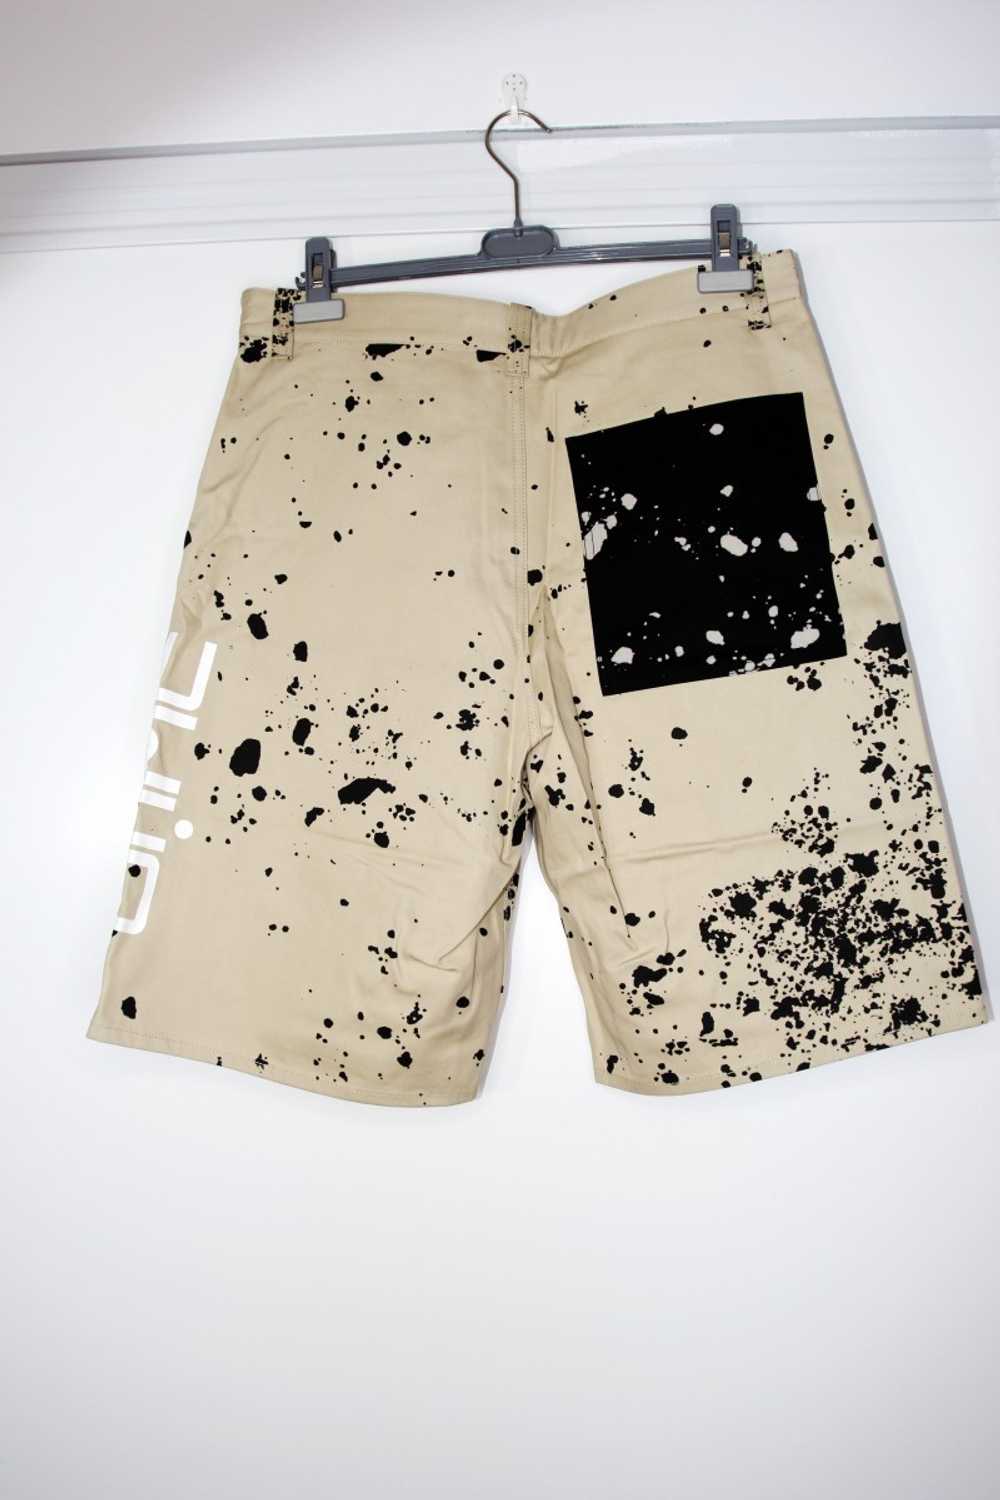 BNWT SS19 OAMC ORION SHORTS 32 - image 3